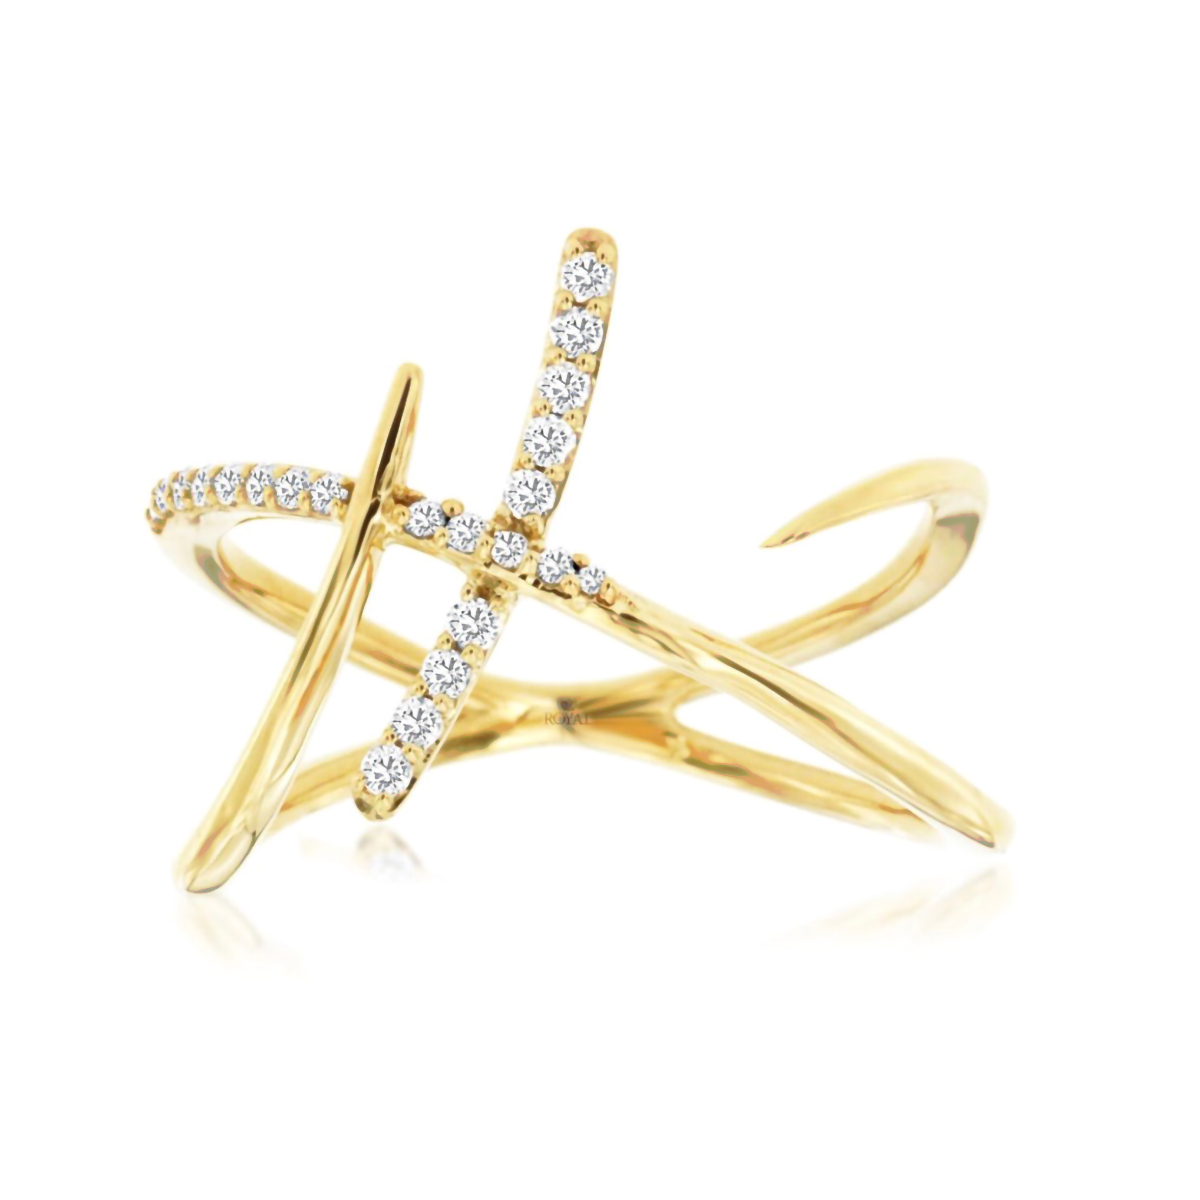 YELLOW GOLD DIAMOND FREE FORM RING - Nelson's Jewelers